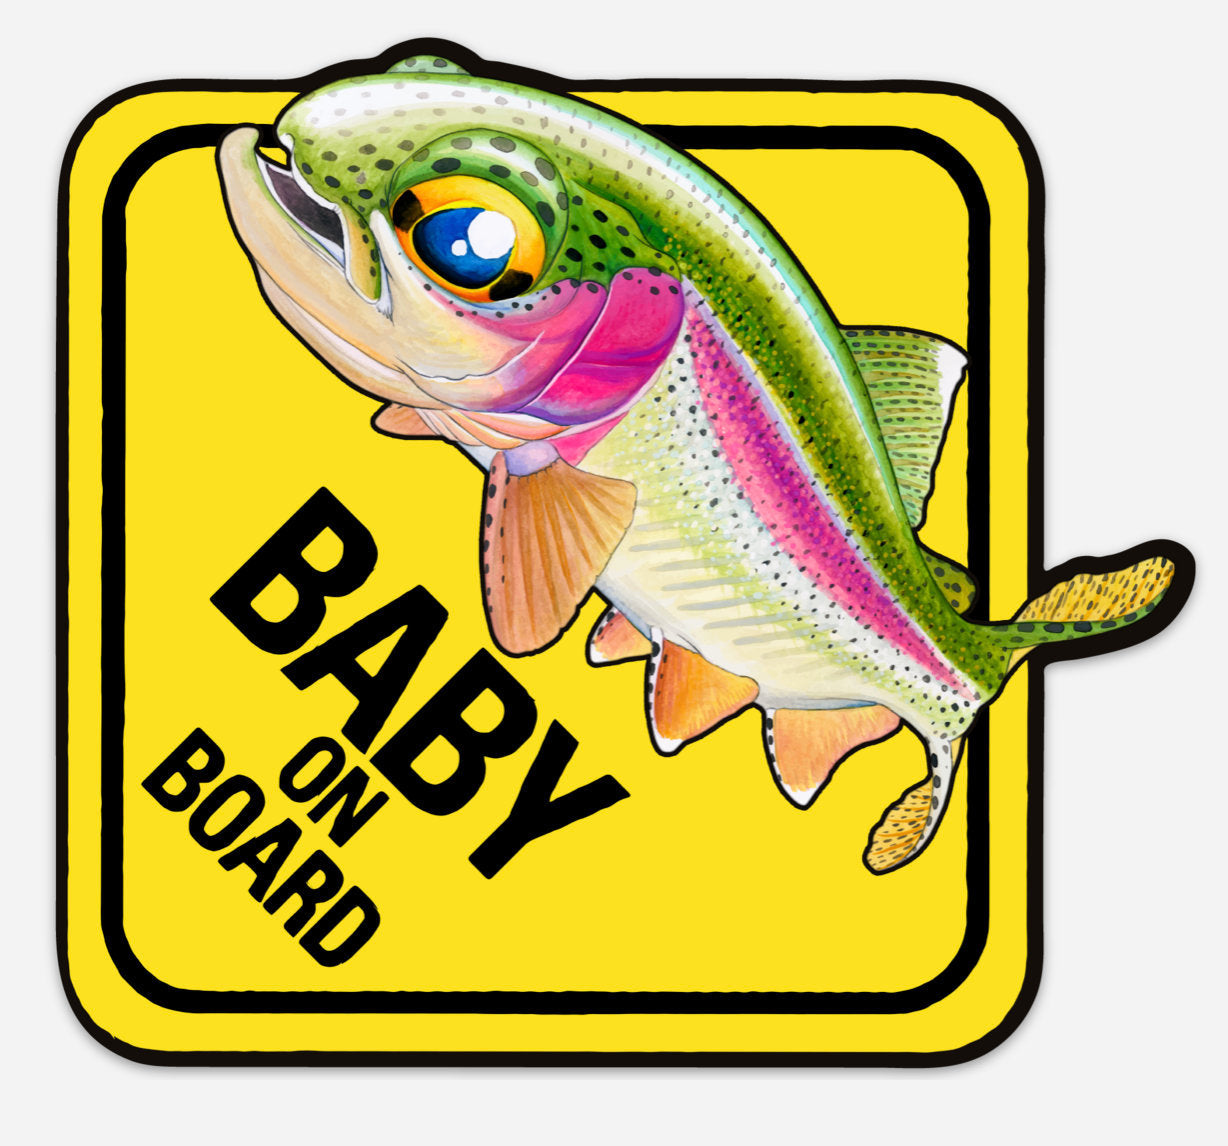 Fly Slaps Ornamented Bass Sticker - Bass Fishing Stickers